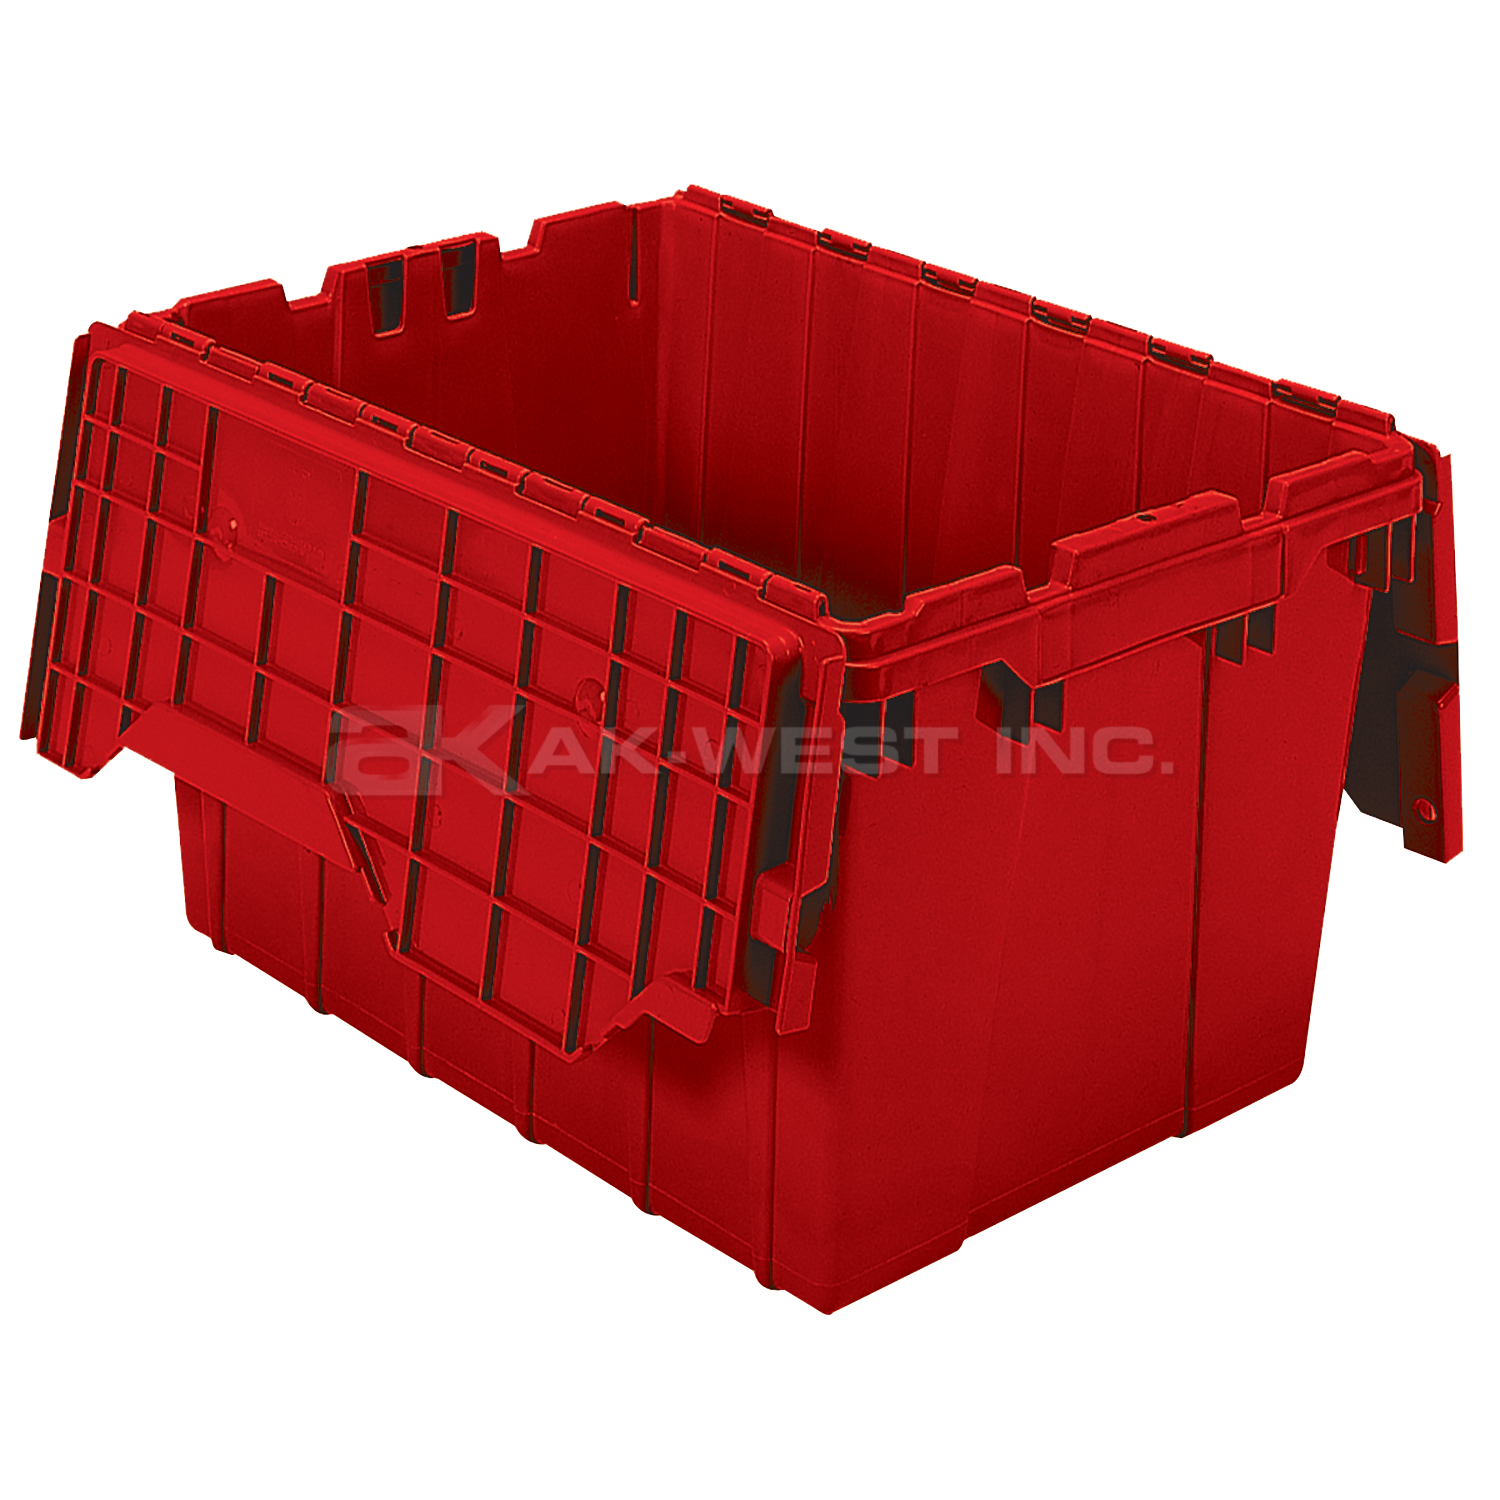 Red, 21" x 15" x 12" Attached Lid Container, Traction Bottom (6 Per Carton)